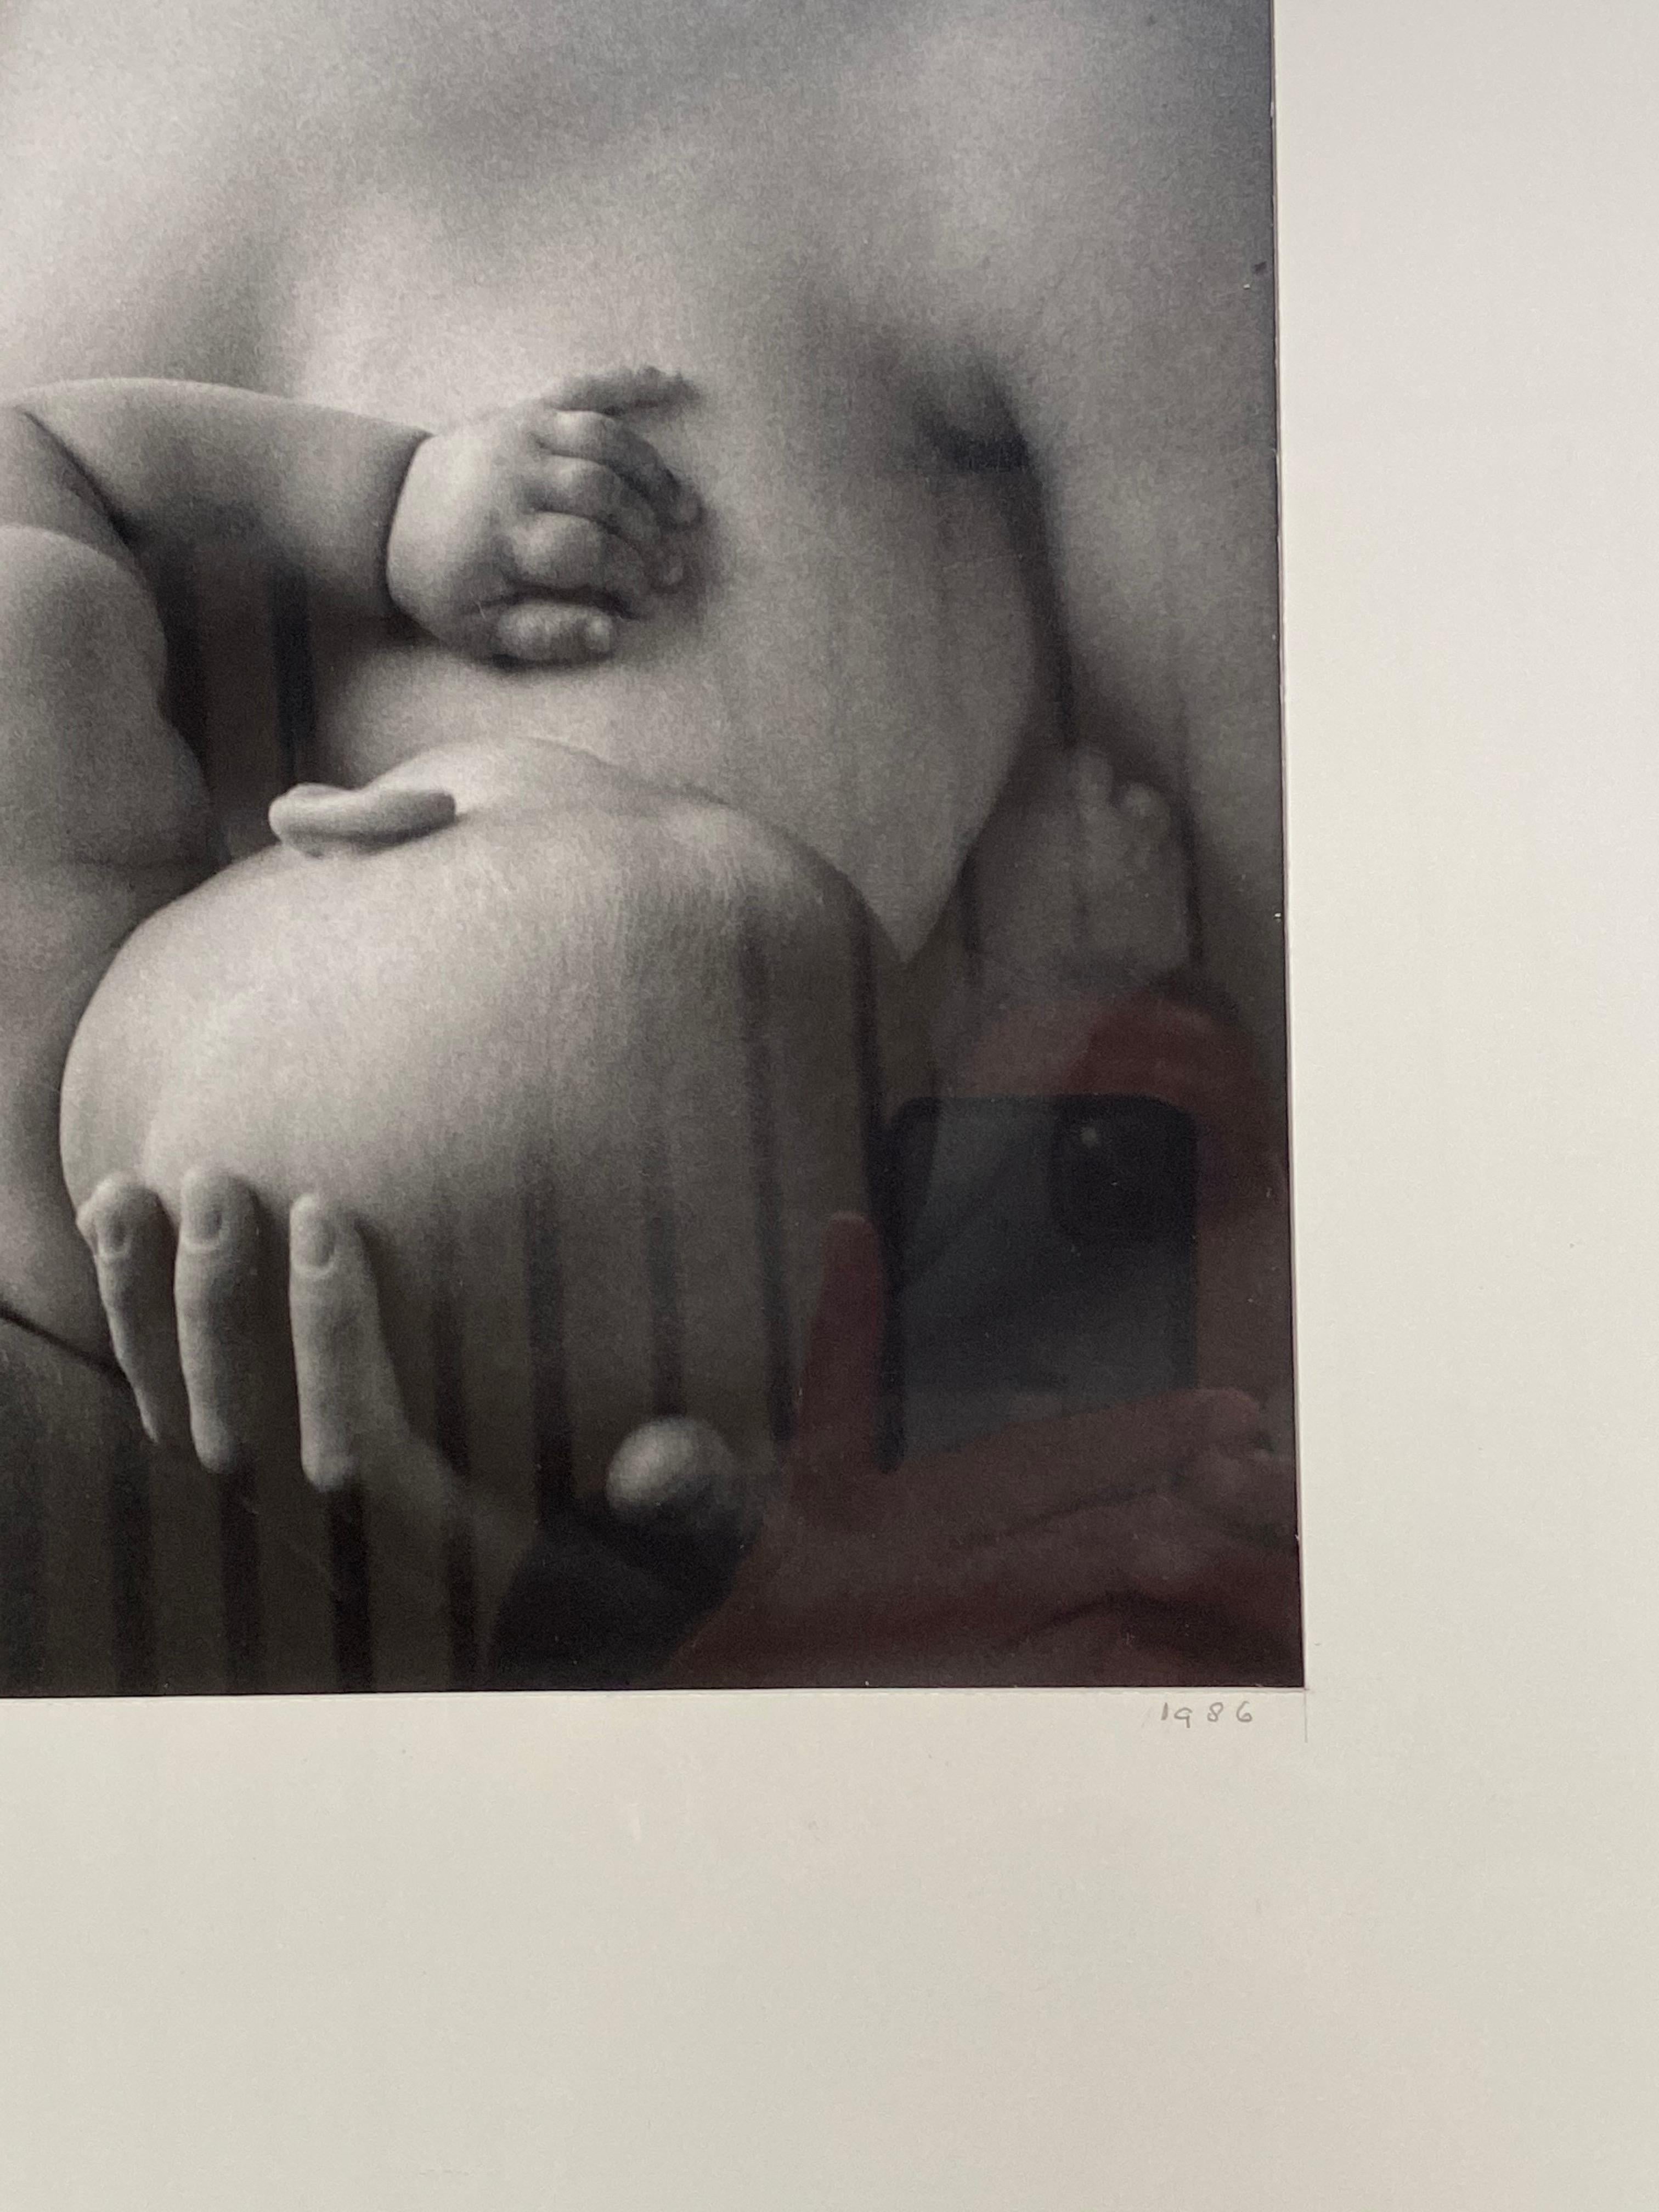 Fritz monshouwer
Mother and child
Silver print signed and dated in the margin below the image 
39 x 29 cms
Bibliography: M.Rebbuzini
Mirrors of the magic muse
Book style editions. Monte Carlo 2013 page 203
Circa 1986
Box 
1900 euros 
( you will find